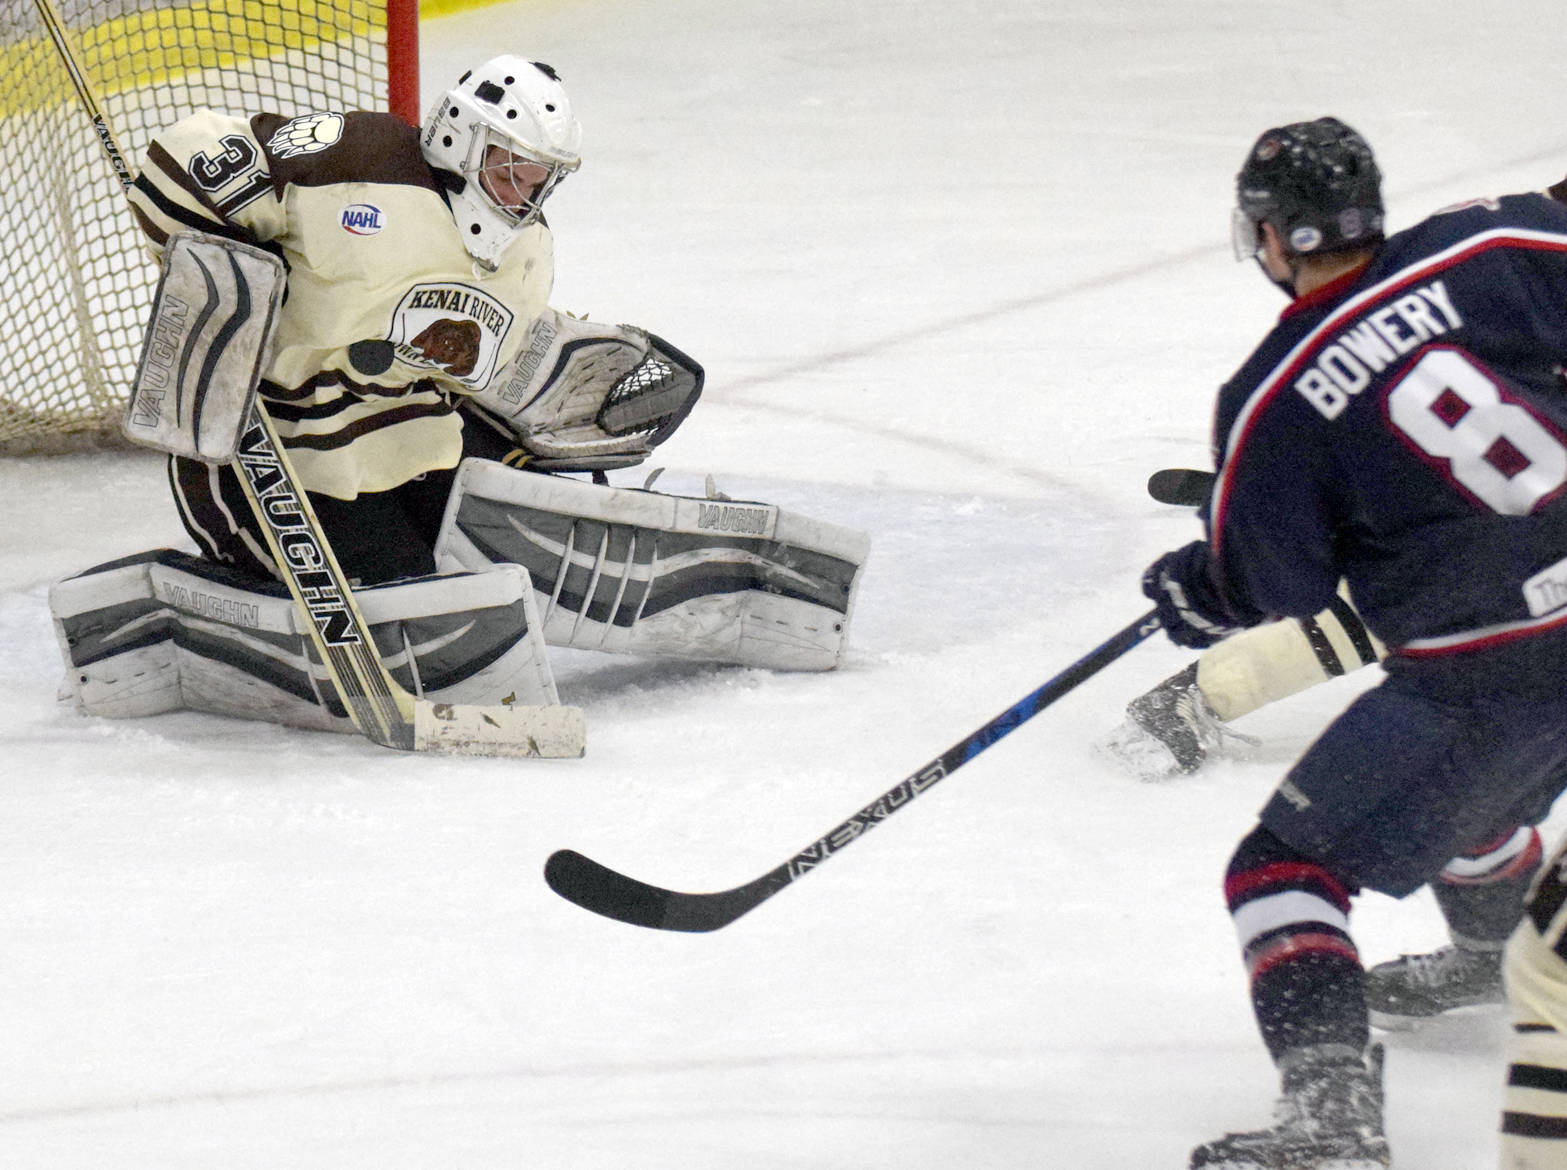 Kenai River Brown Bears goaltender Colt Hanks gets his body in front of a shot as Topeka (Kansas) RoadRunners forward Marshall Bowery lurks looking for the rebound Friday, March 17, 2017, at the Soldotna Regional Sports Complex. (Photo by Jeff Helminiak/Peninsula Clarion)